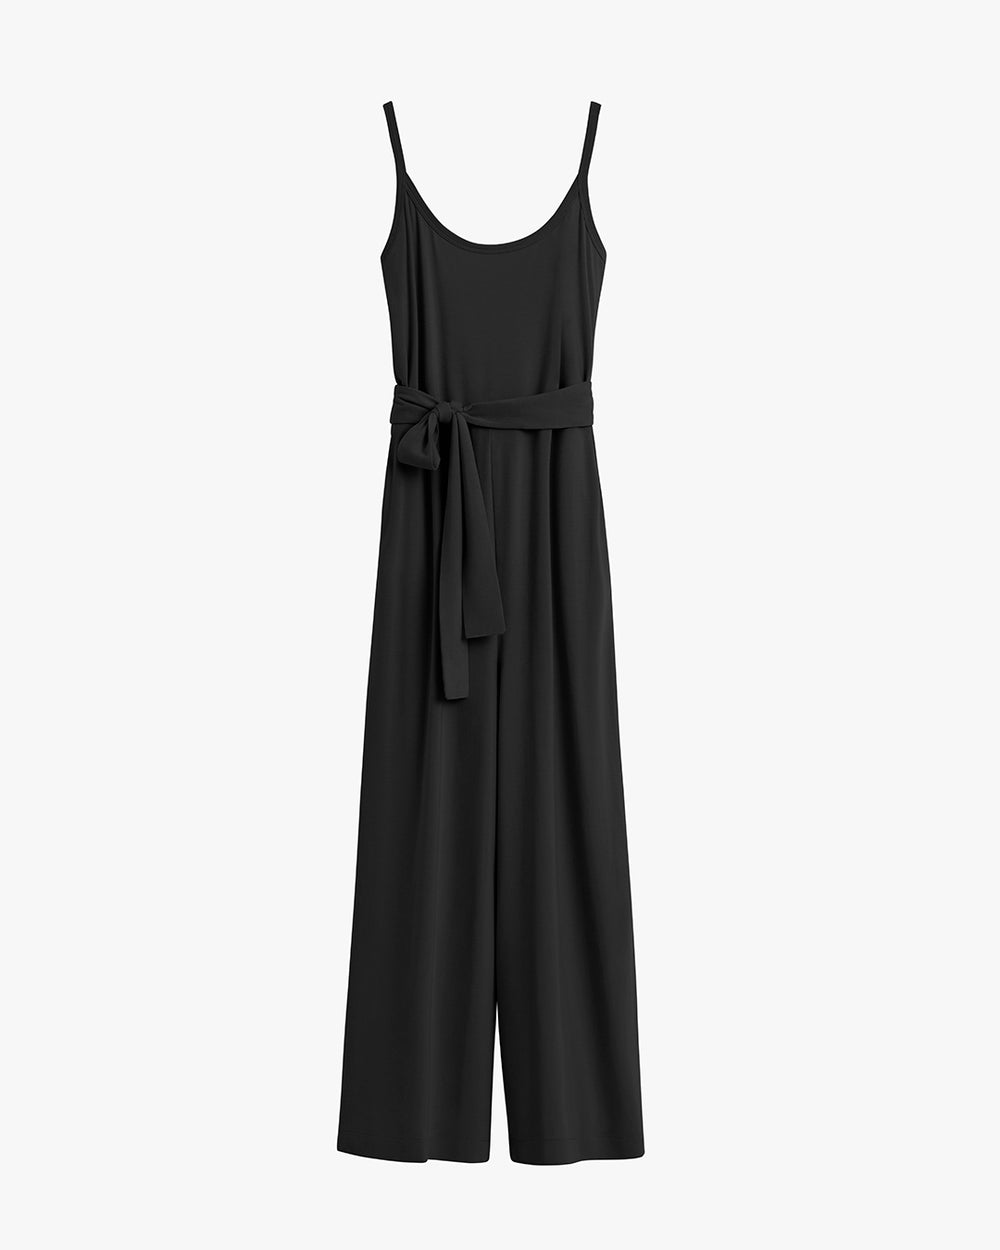 Sleeveless jumpsuit with a tie at the waist.